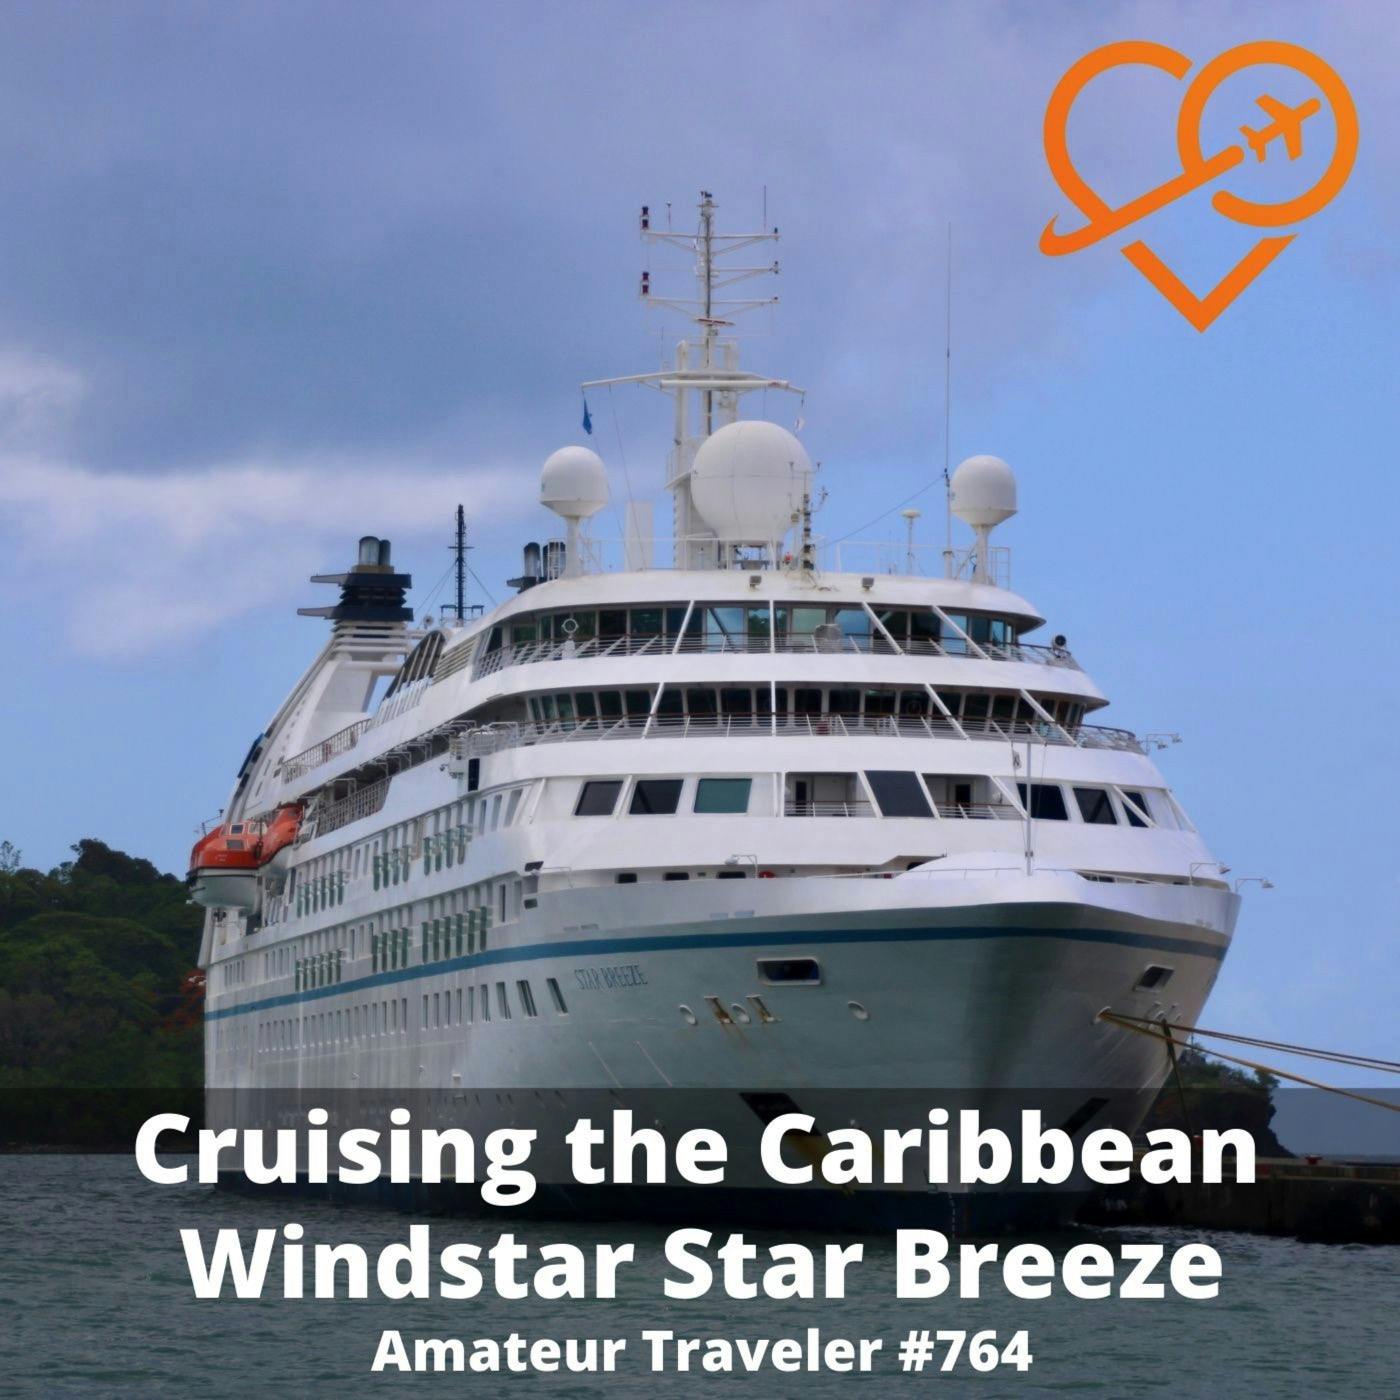 AT#764 - Sailing the Caribbean on the Windstar Star Breeze